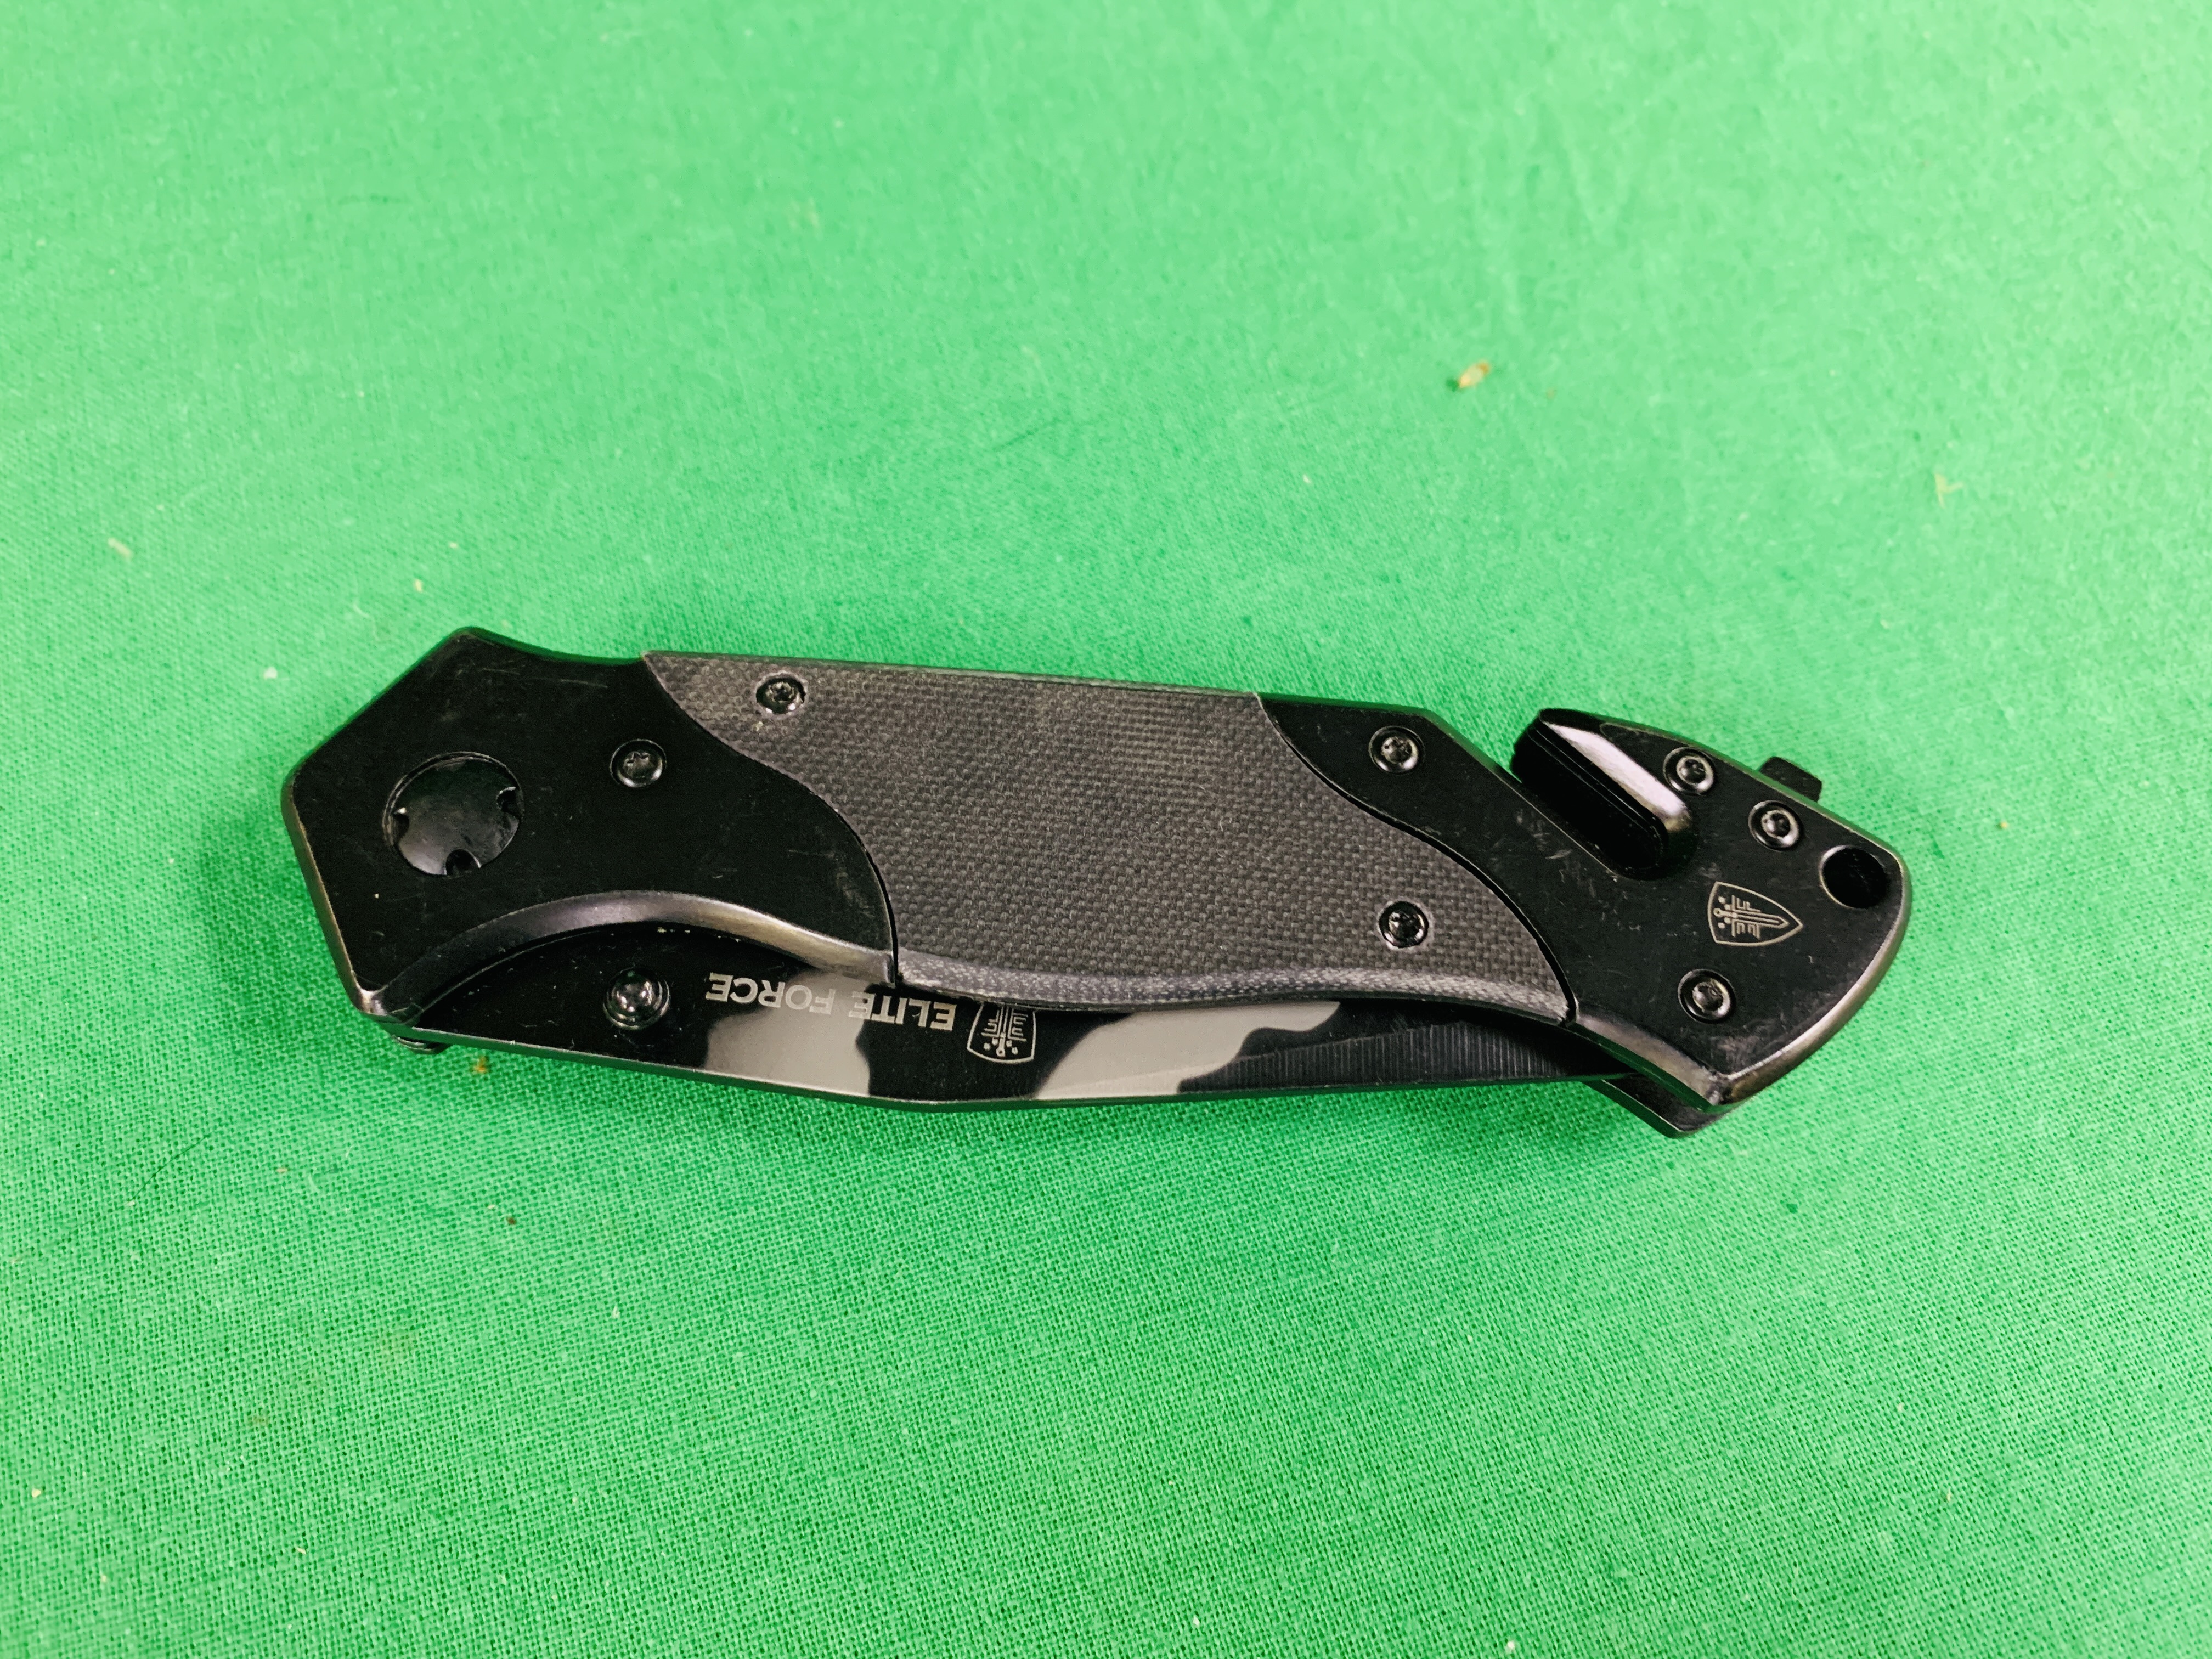 AN ELITE FORCE POCKET KNIFE AND UMAREX ALPINA SPORT KNIFE IN SHEATH - COLLECTION ONLY - Image 8 of 9